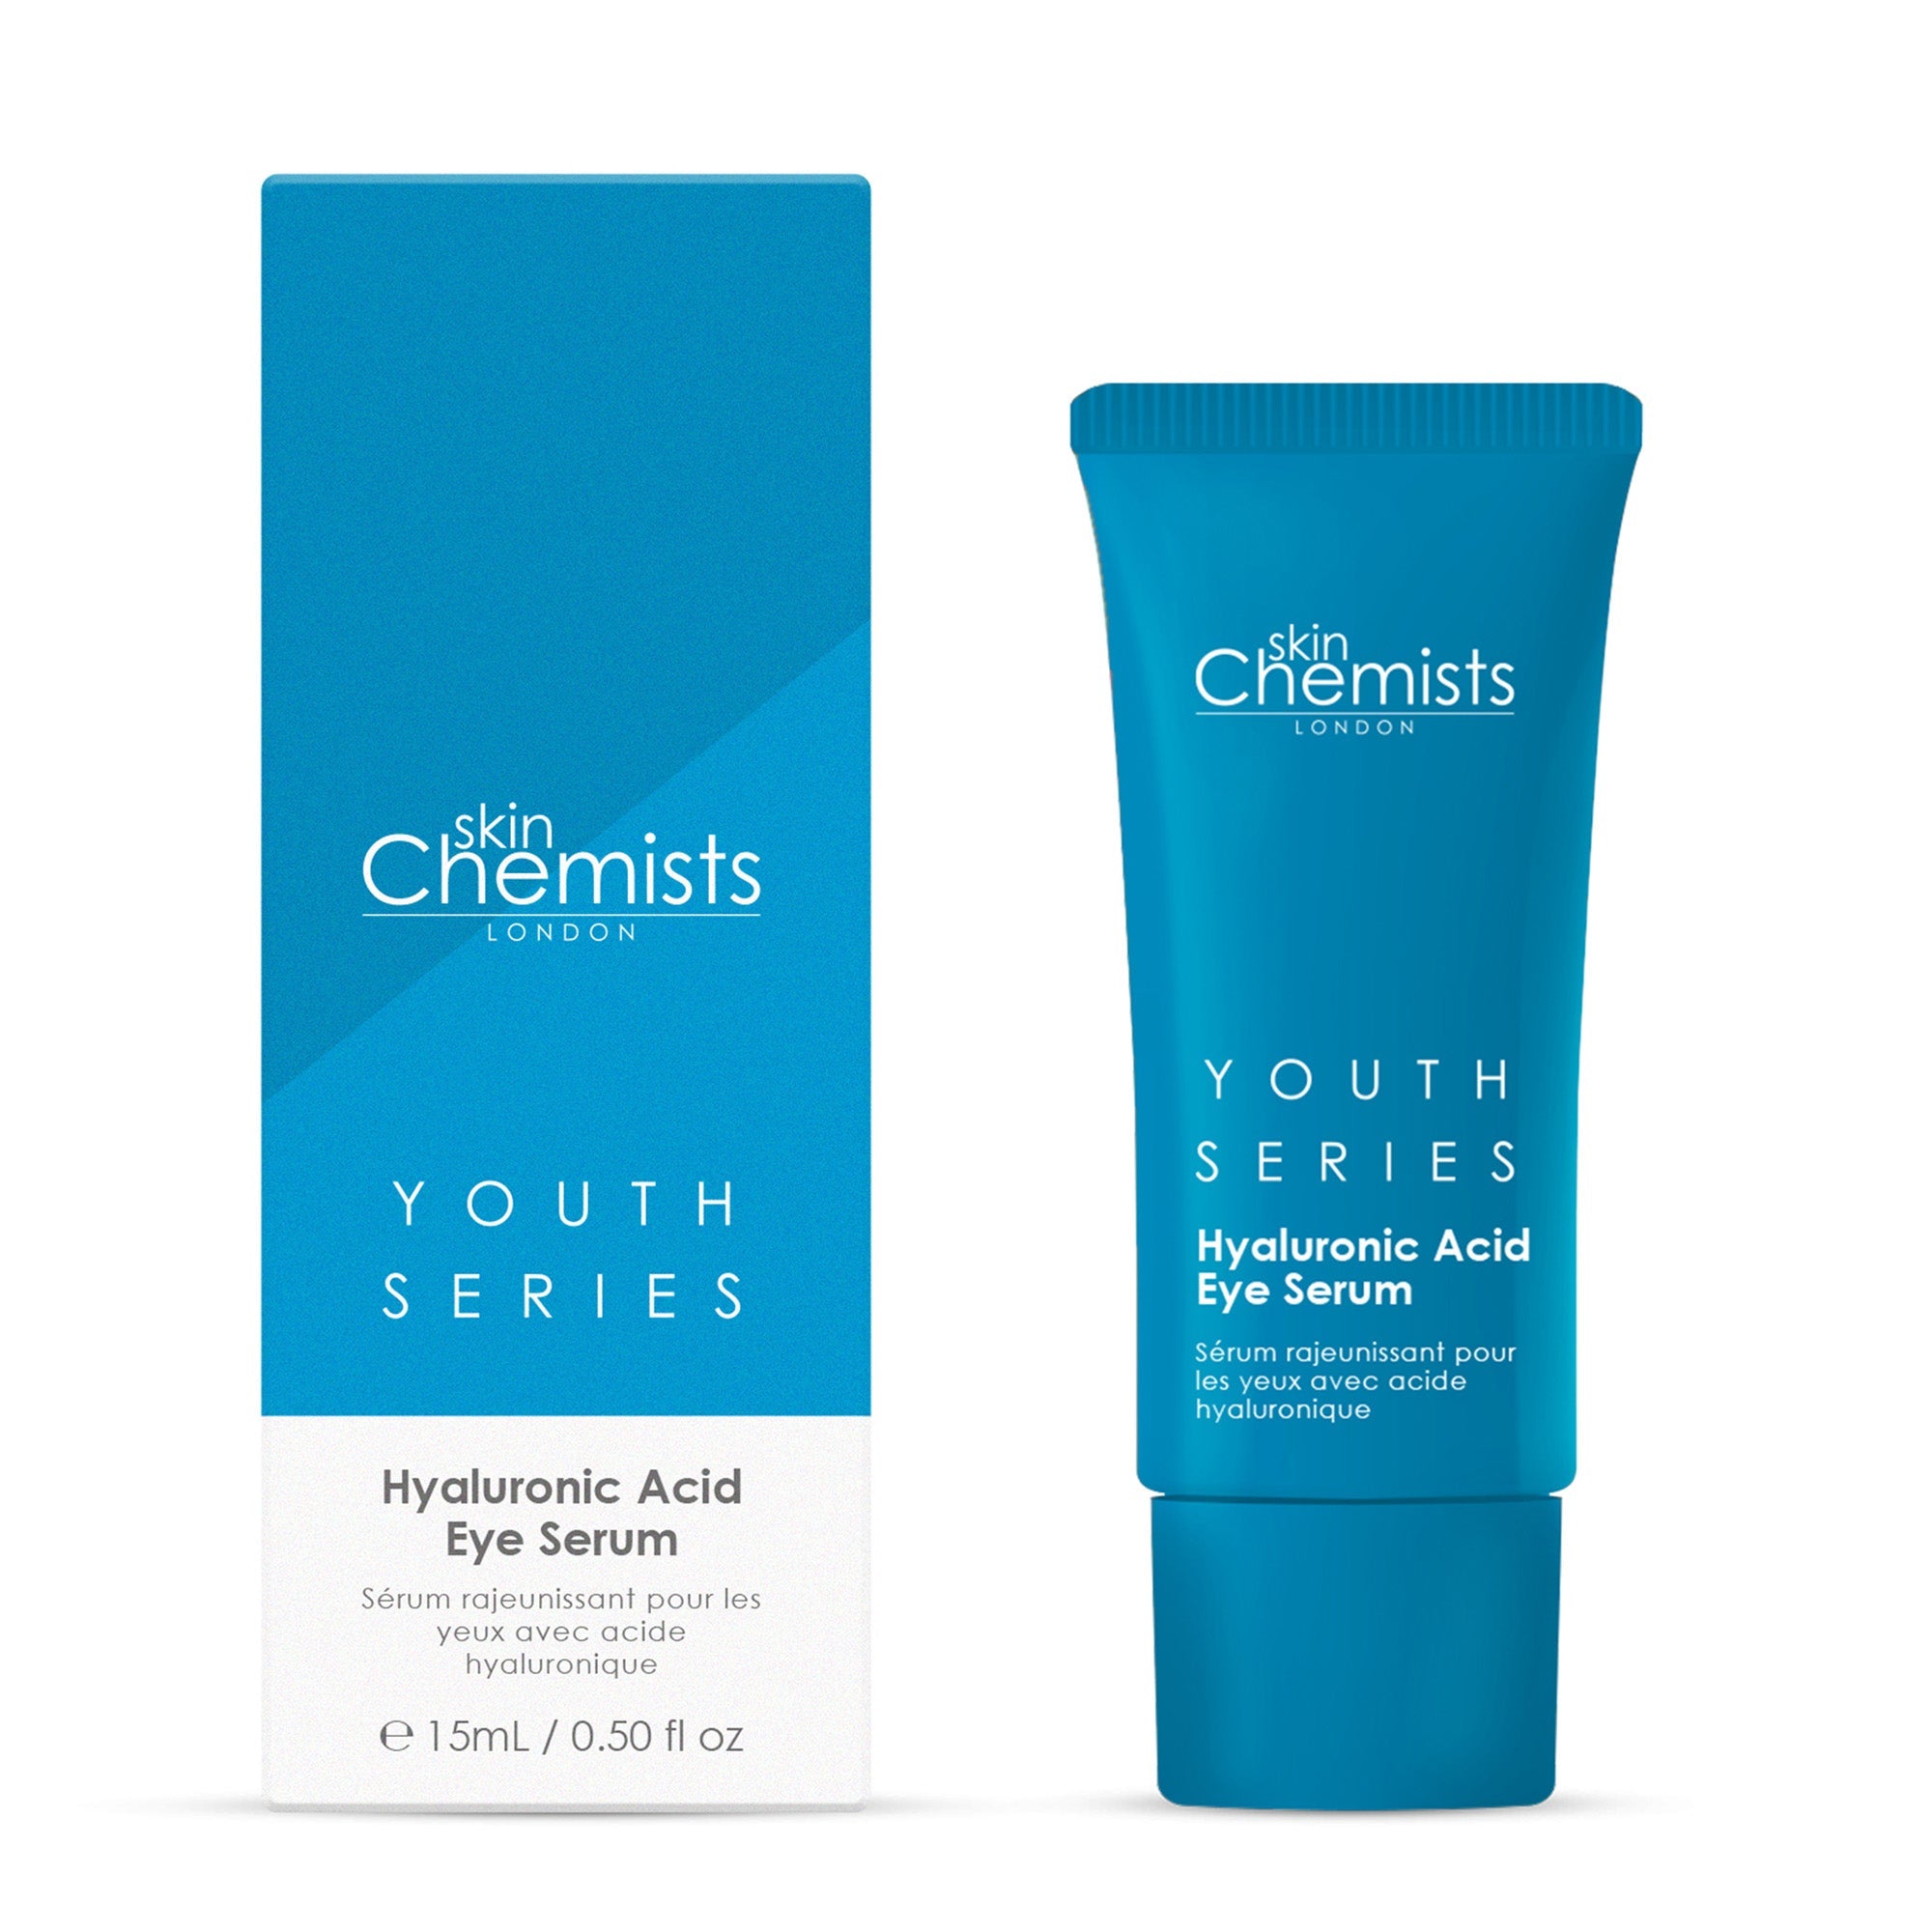 Youth Series Hyaluronic Acid Evening Essentials Kit - skinChemists